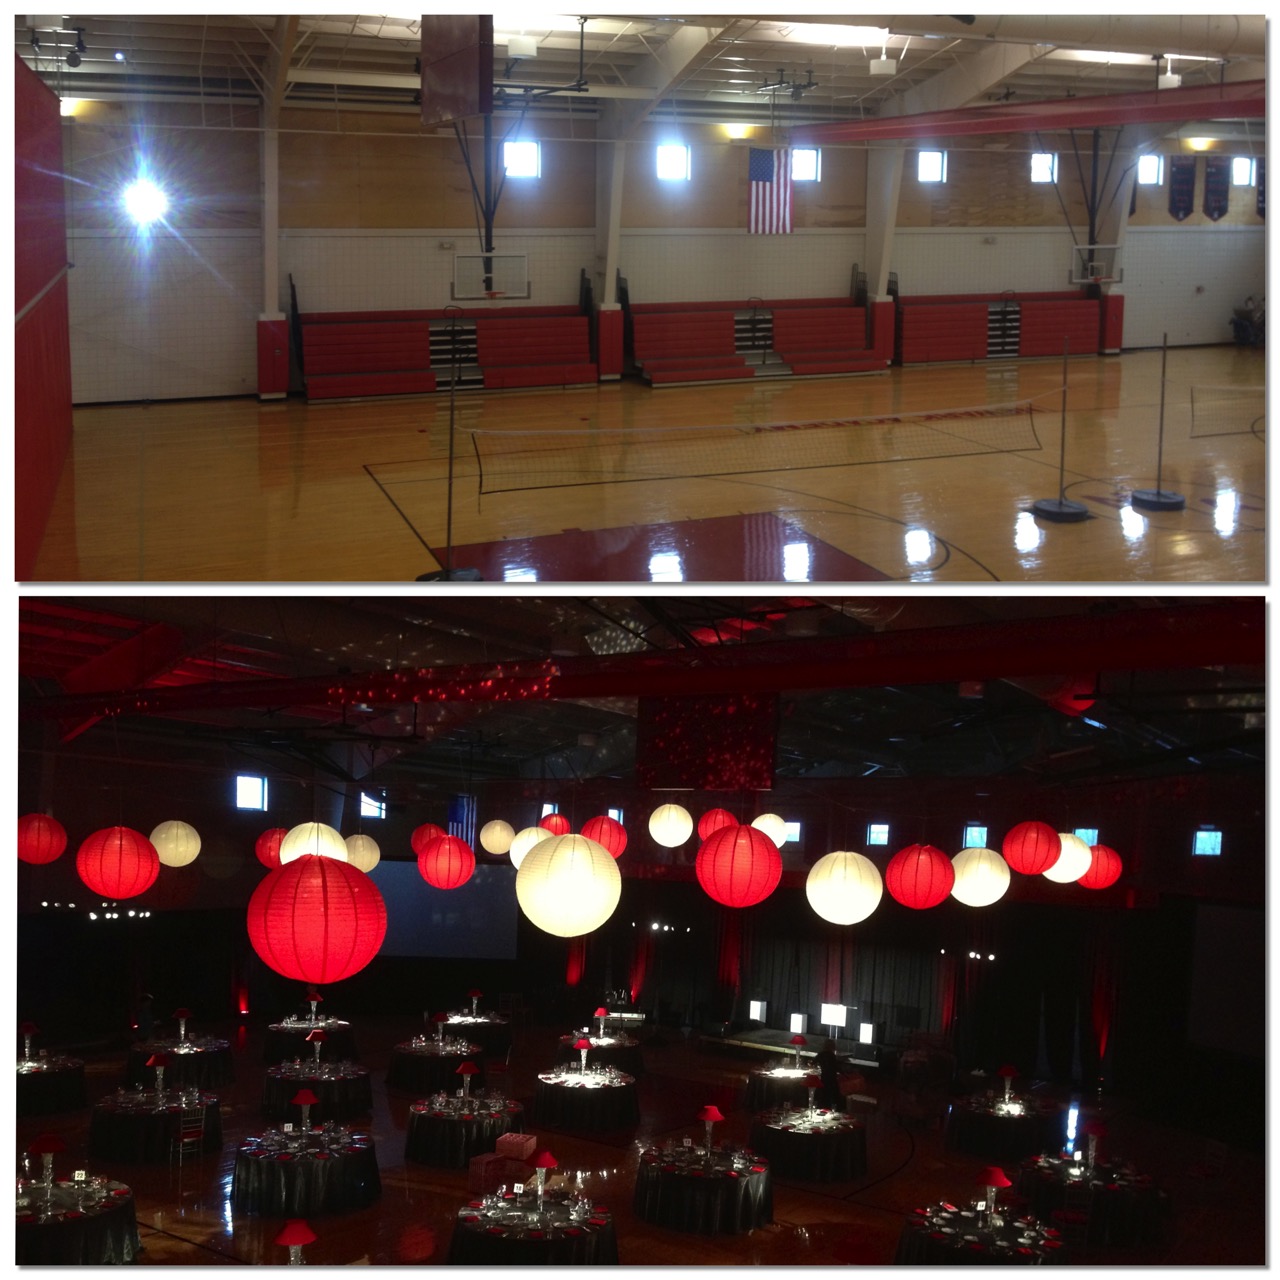 Before and After Event Design Lighting Draping Room Decor by Eggsotic Events  - 1.jpg